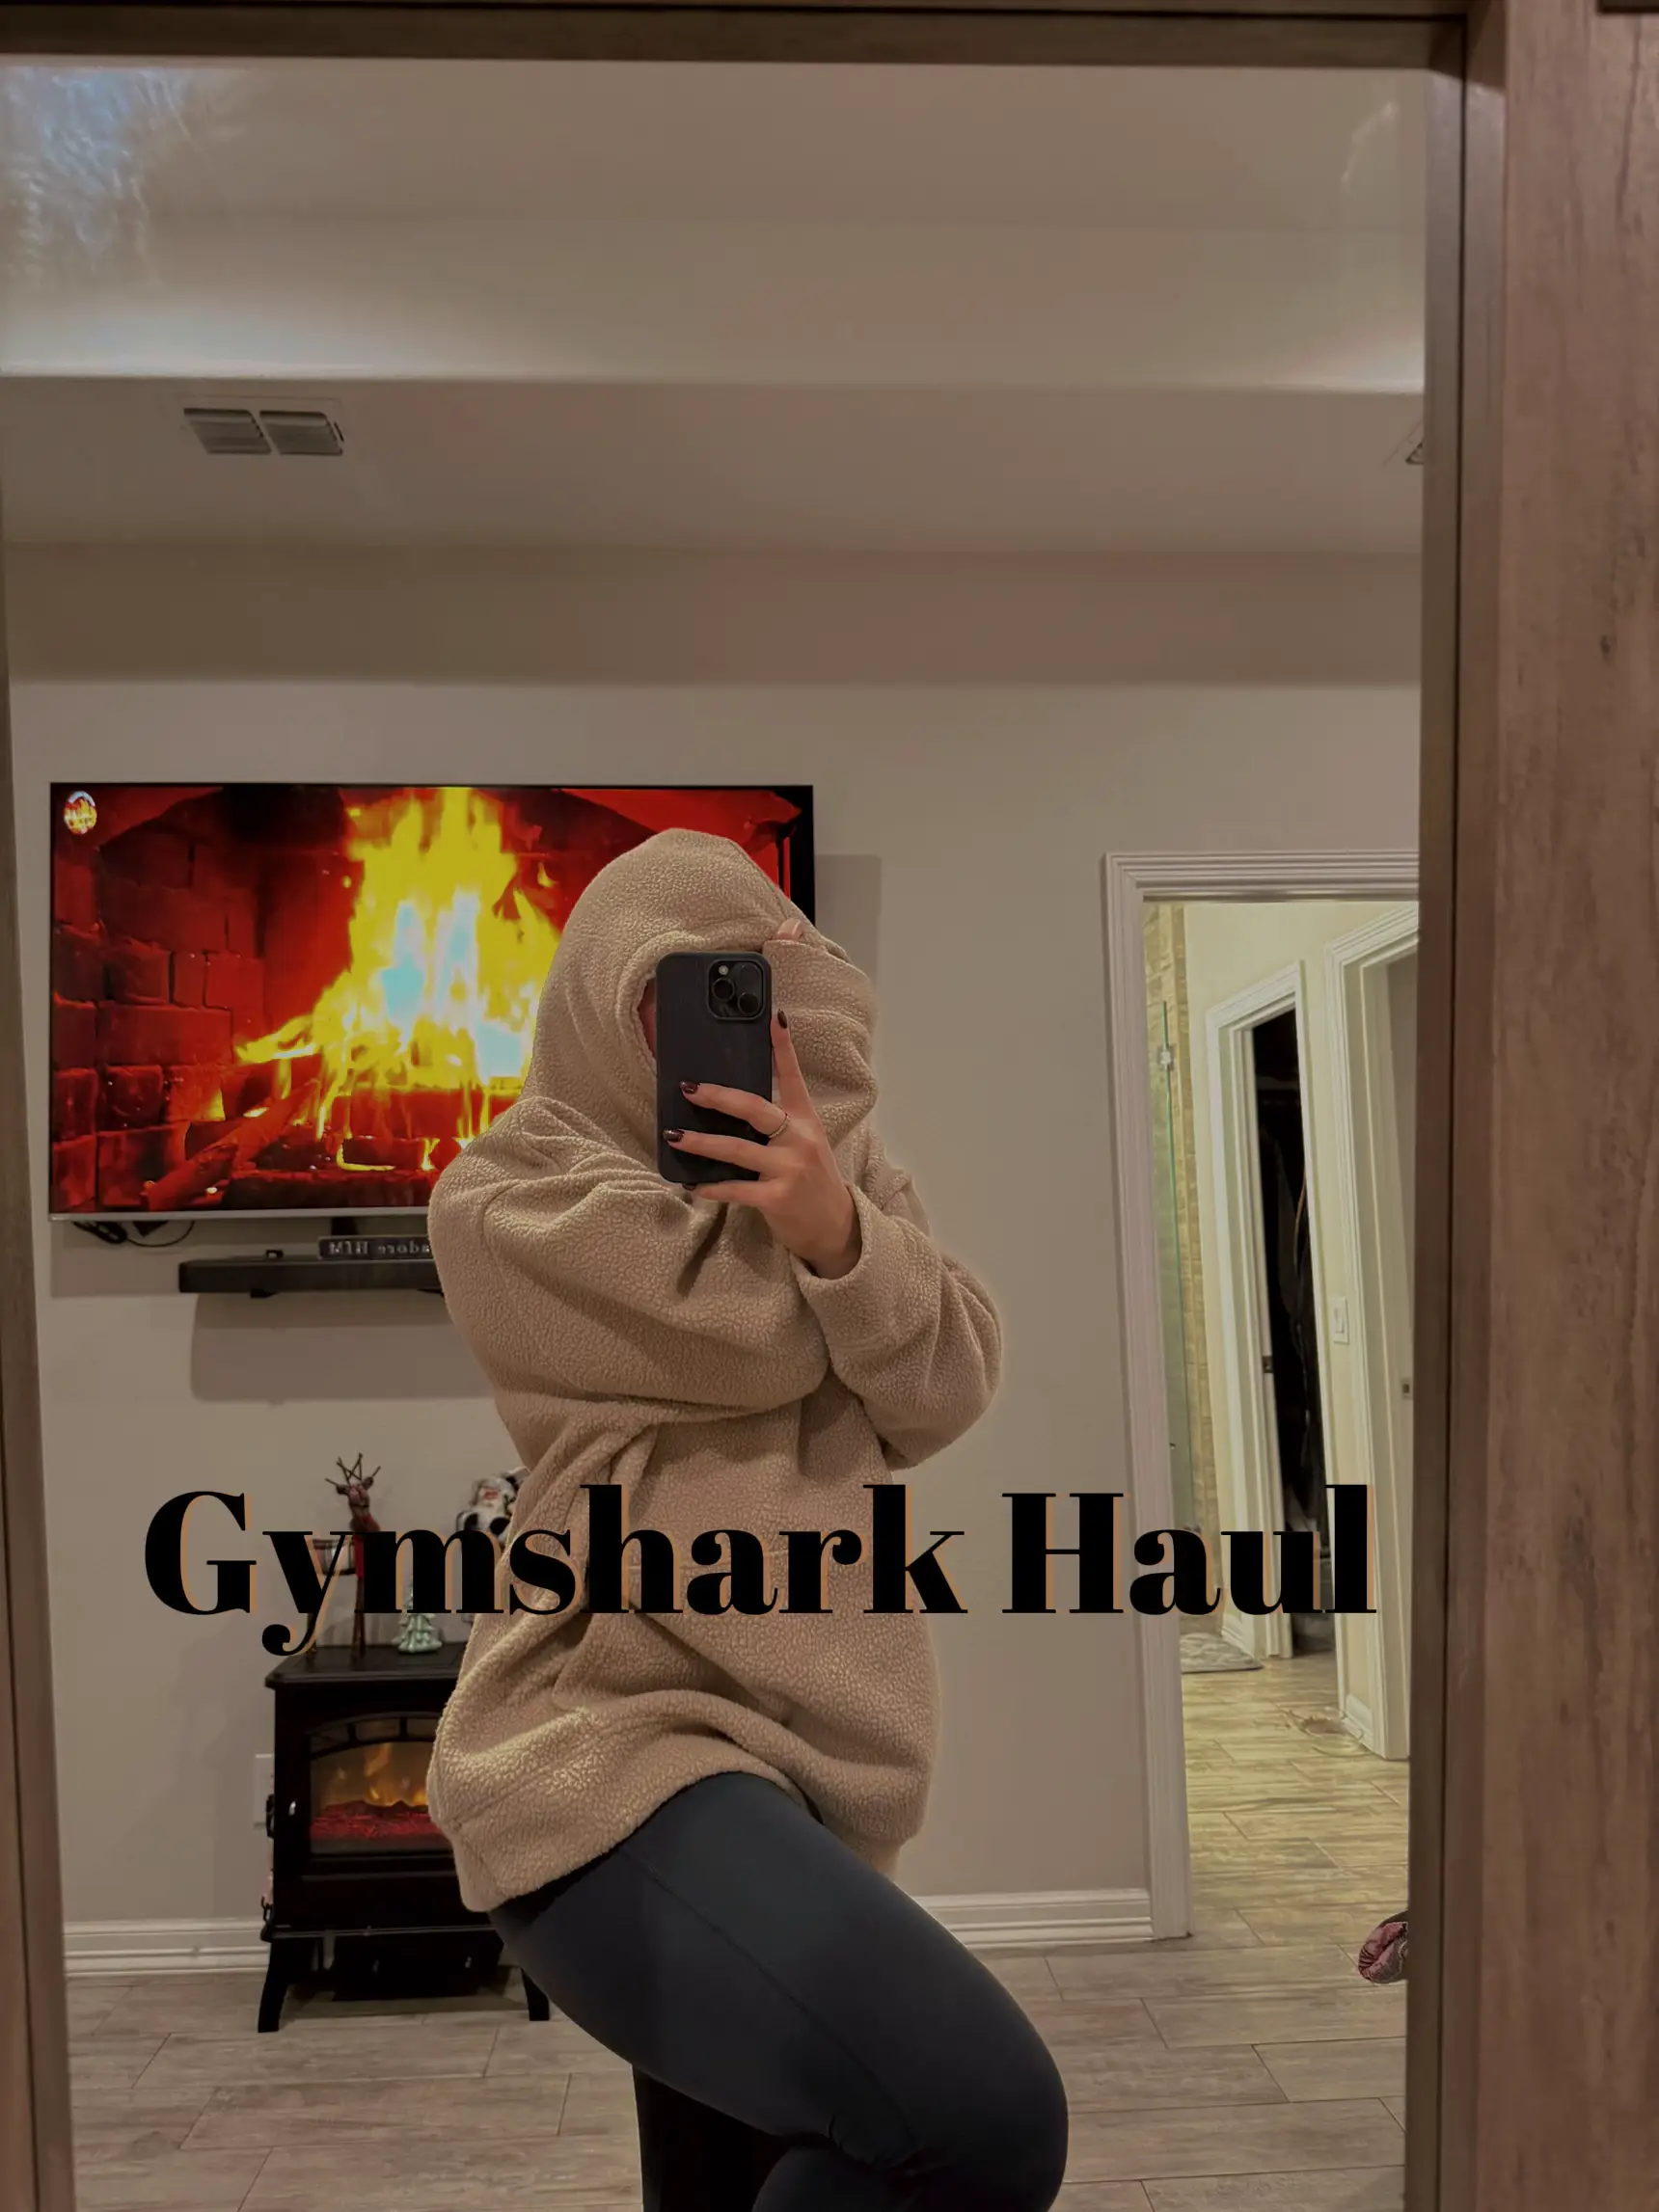 If you do not fail your not trying. @gymshark #gymshark